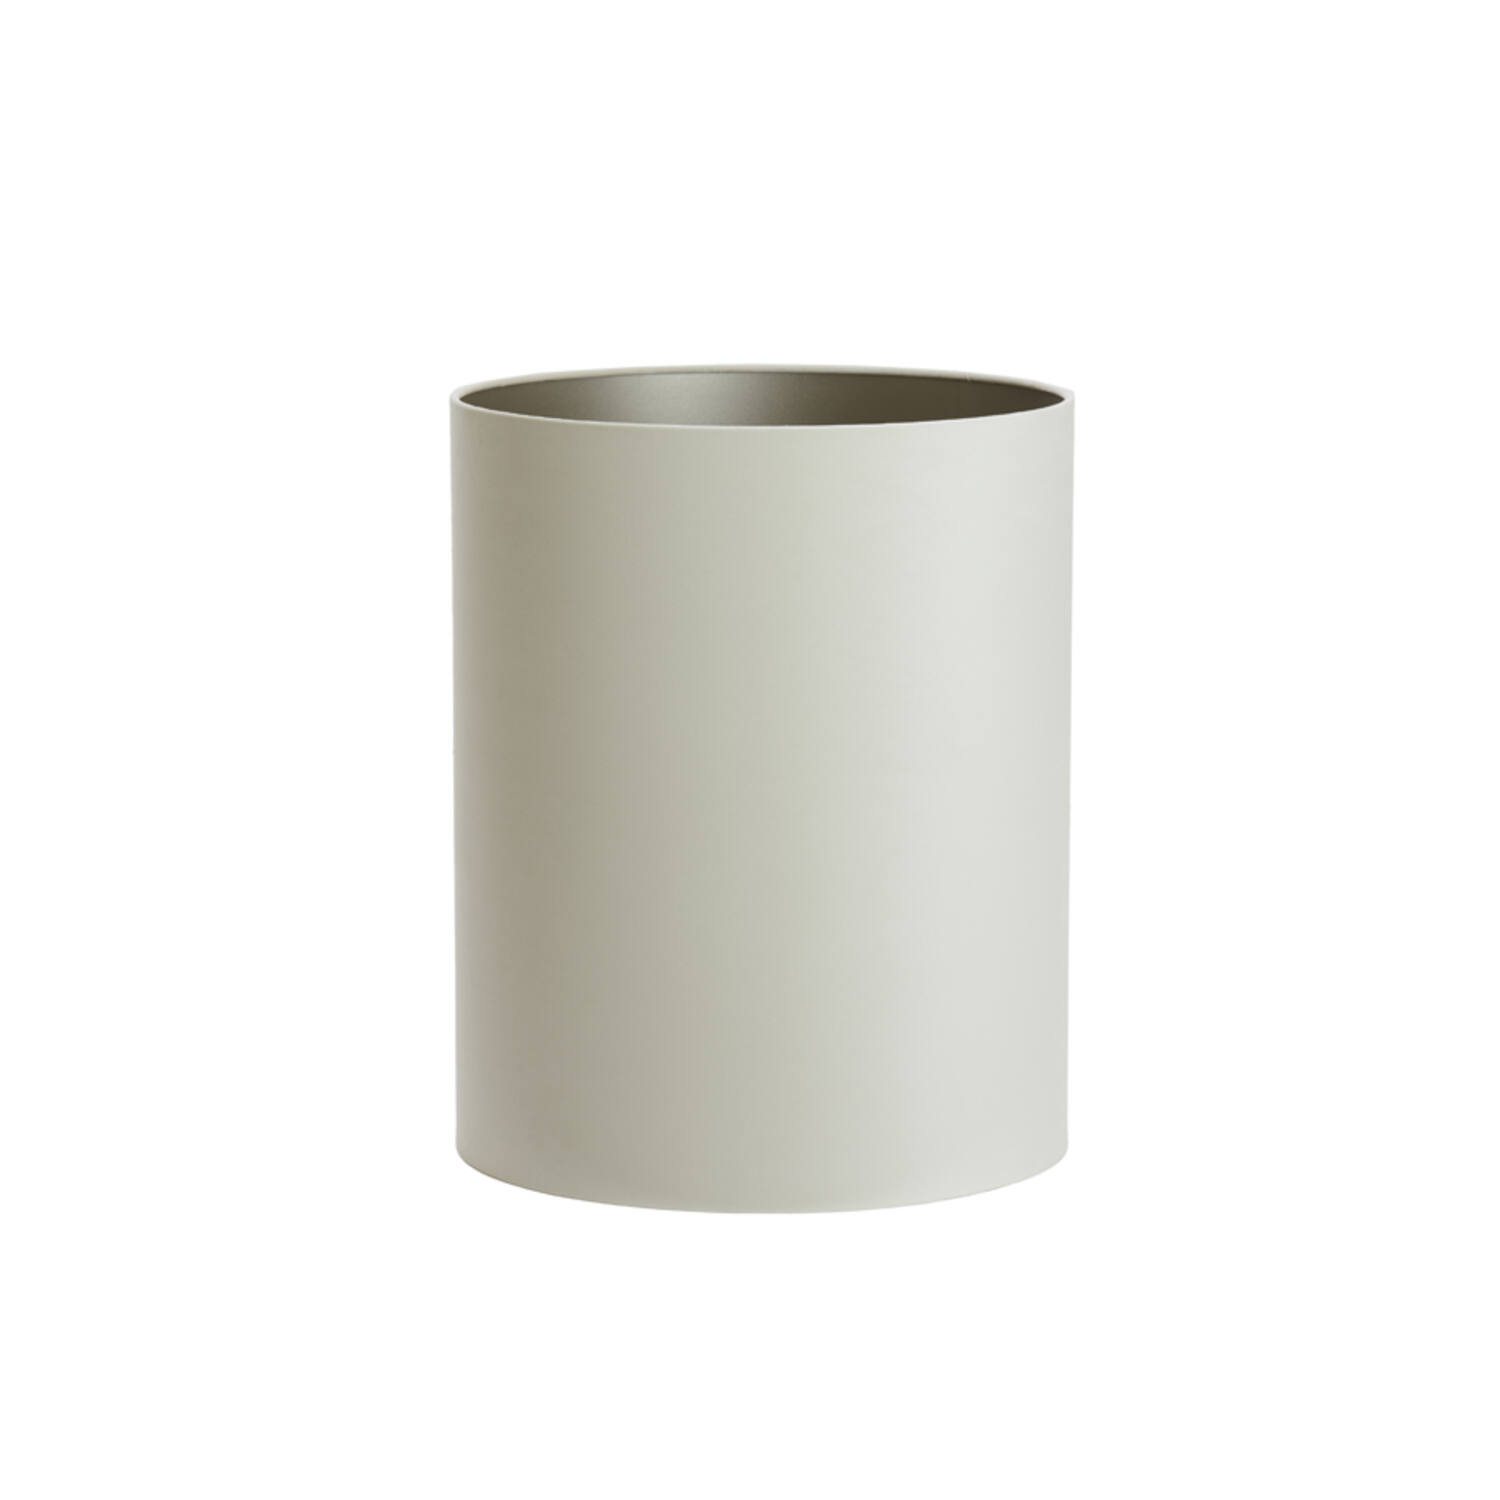 Shade cylinder 40-40-49 cm VELOURS off white